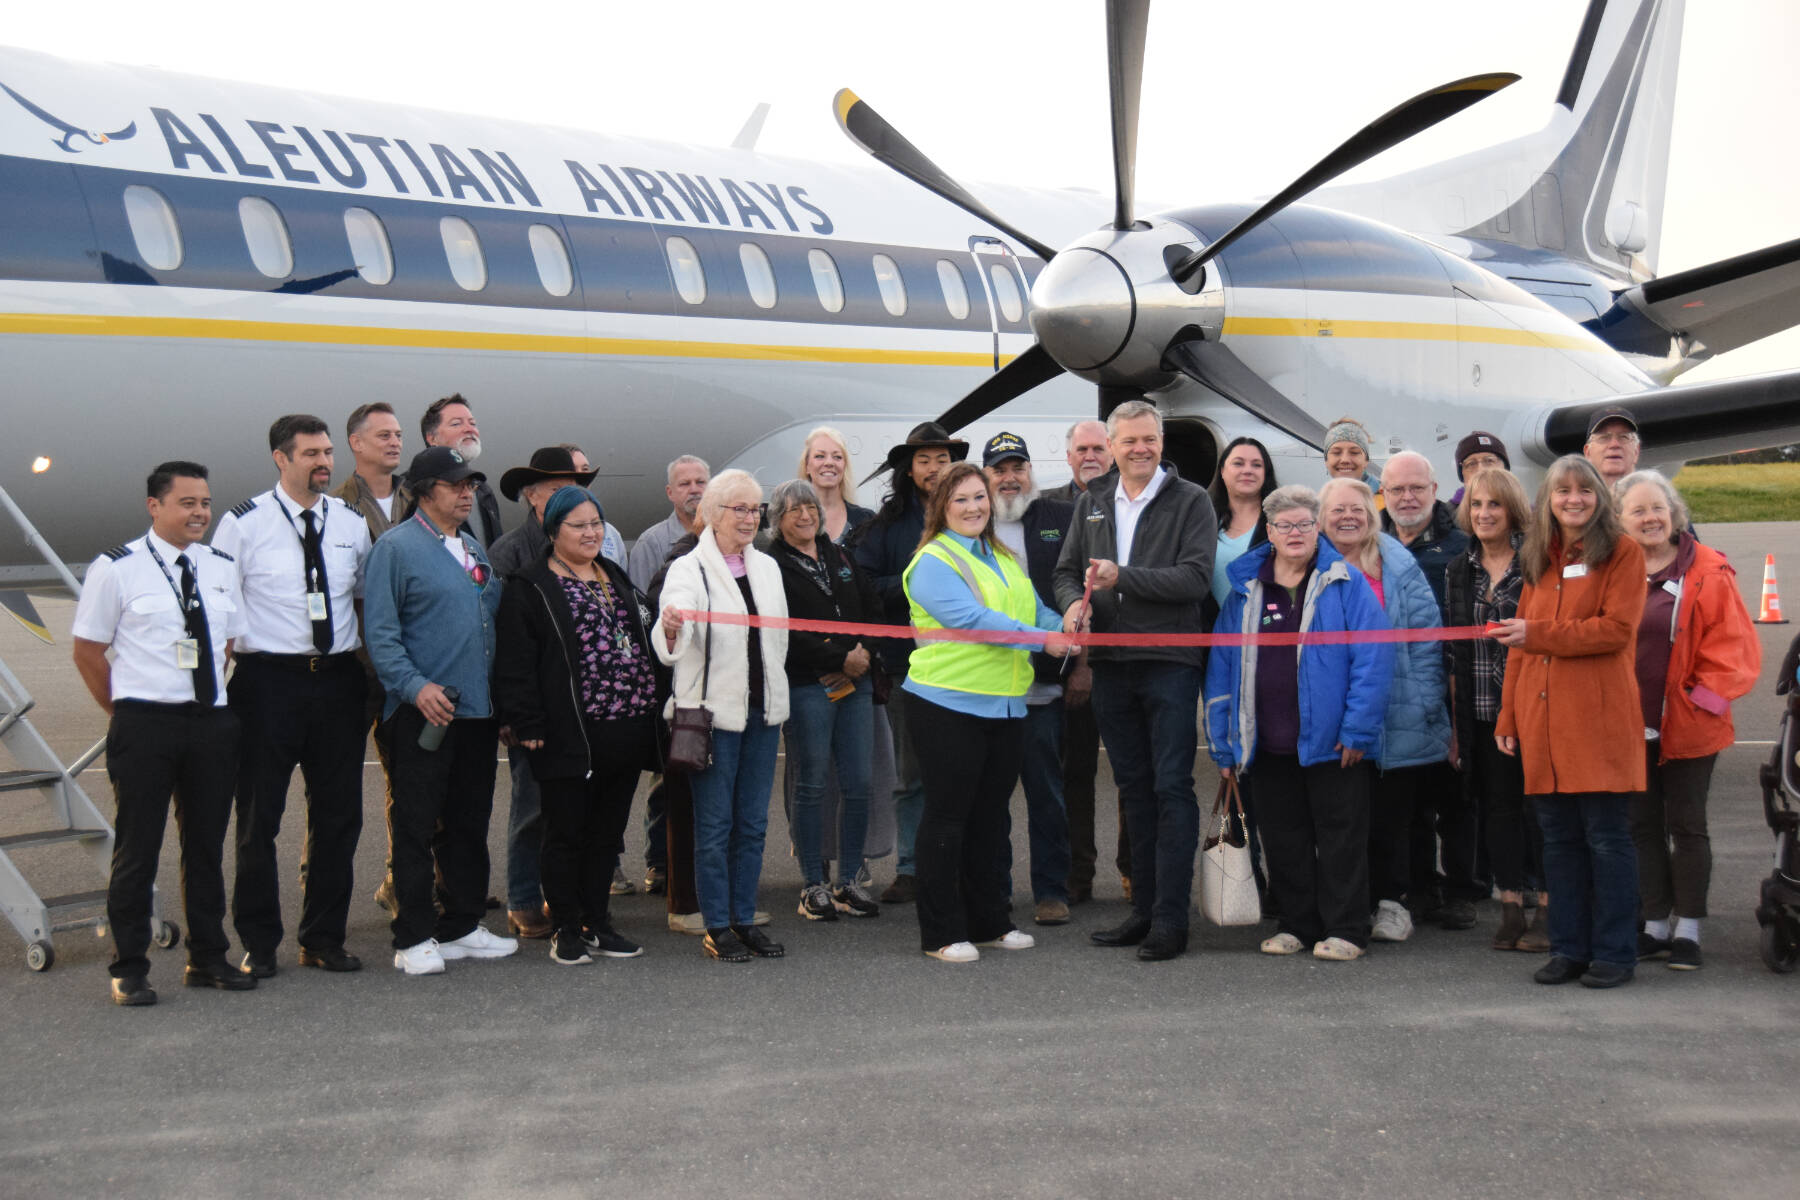 Alaska general manager Brian Whilden (center right) and Homer station manager Ashley Appel (center left) pose with flight staff and community members during a ribbon-cutting ceremony for Aleutian Airways at the Homer Airport on Tuesday, Sept. 19, 2023 in Homer, Alaska. (Delcenia Cosman/Homer News)